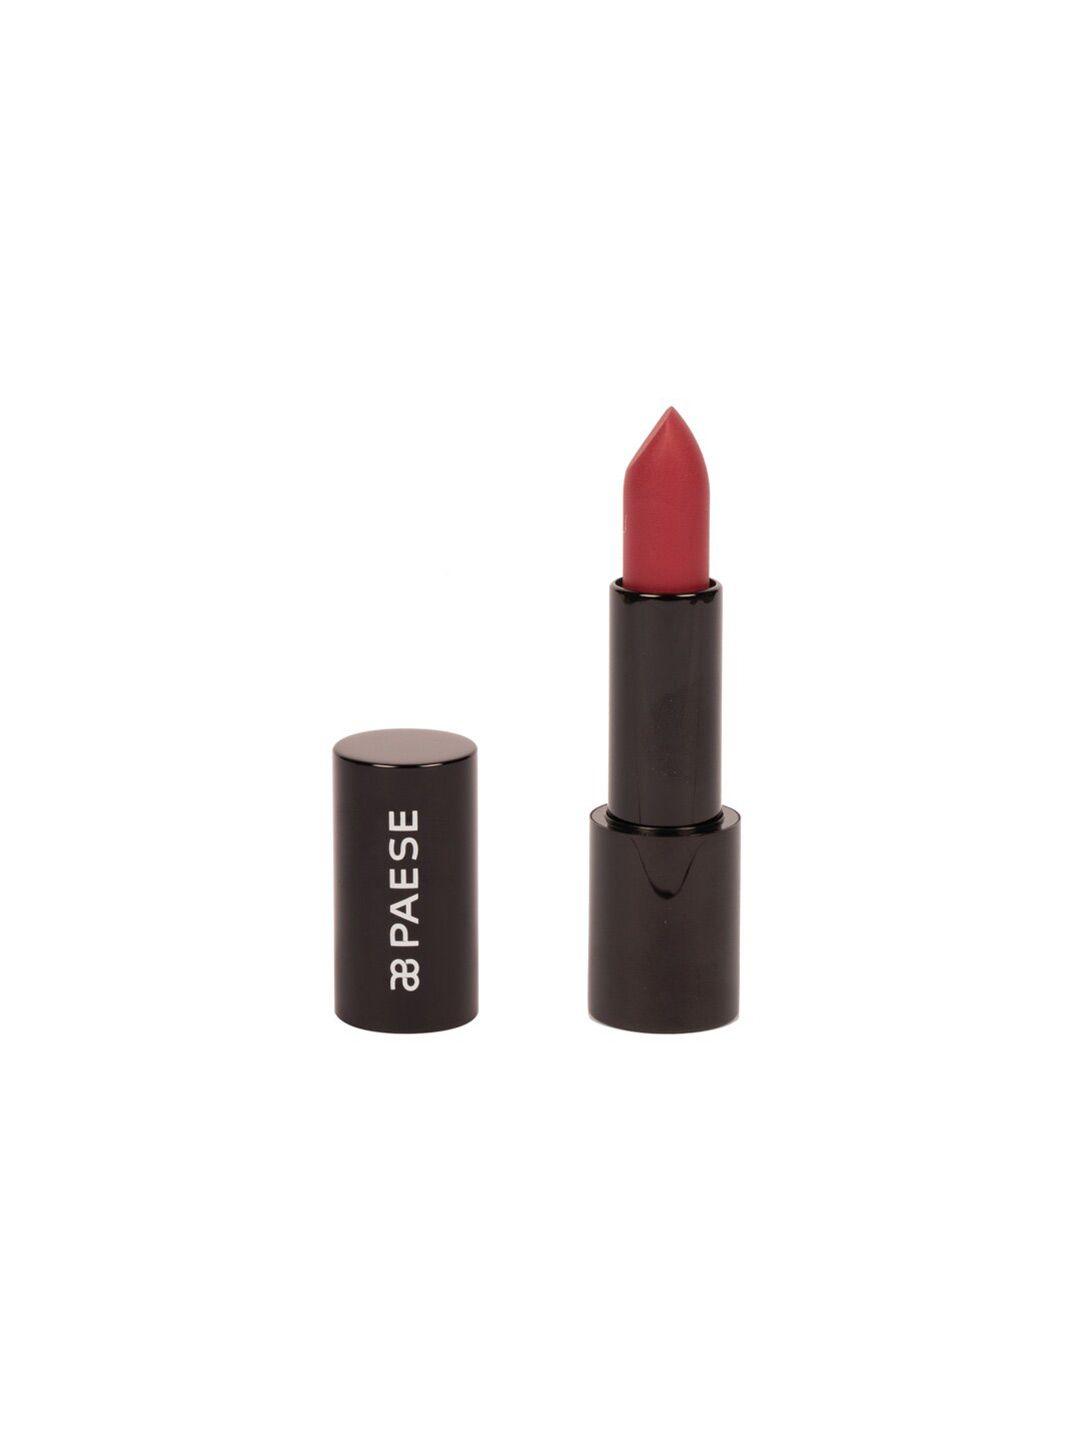 paese cosmetics mattologie matte lipstick with rice oil 4.3 g - berry nude 109